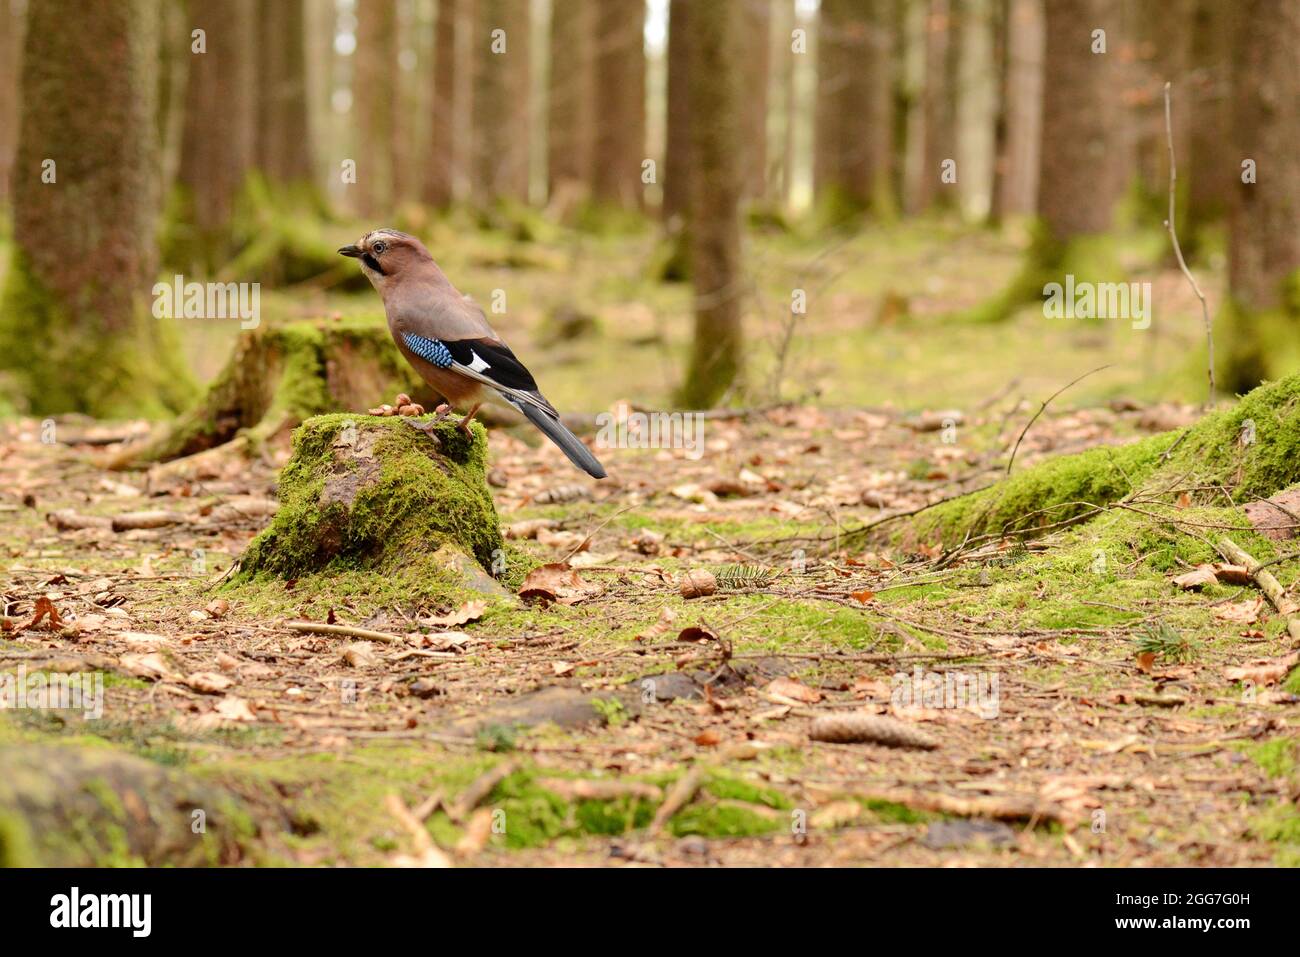 A selective side profile of a Eurasian jay (Garrulus glandarius) standing in a tree stump in the forest Stock Photo